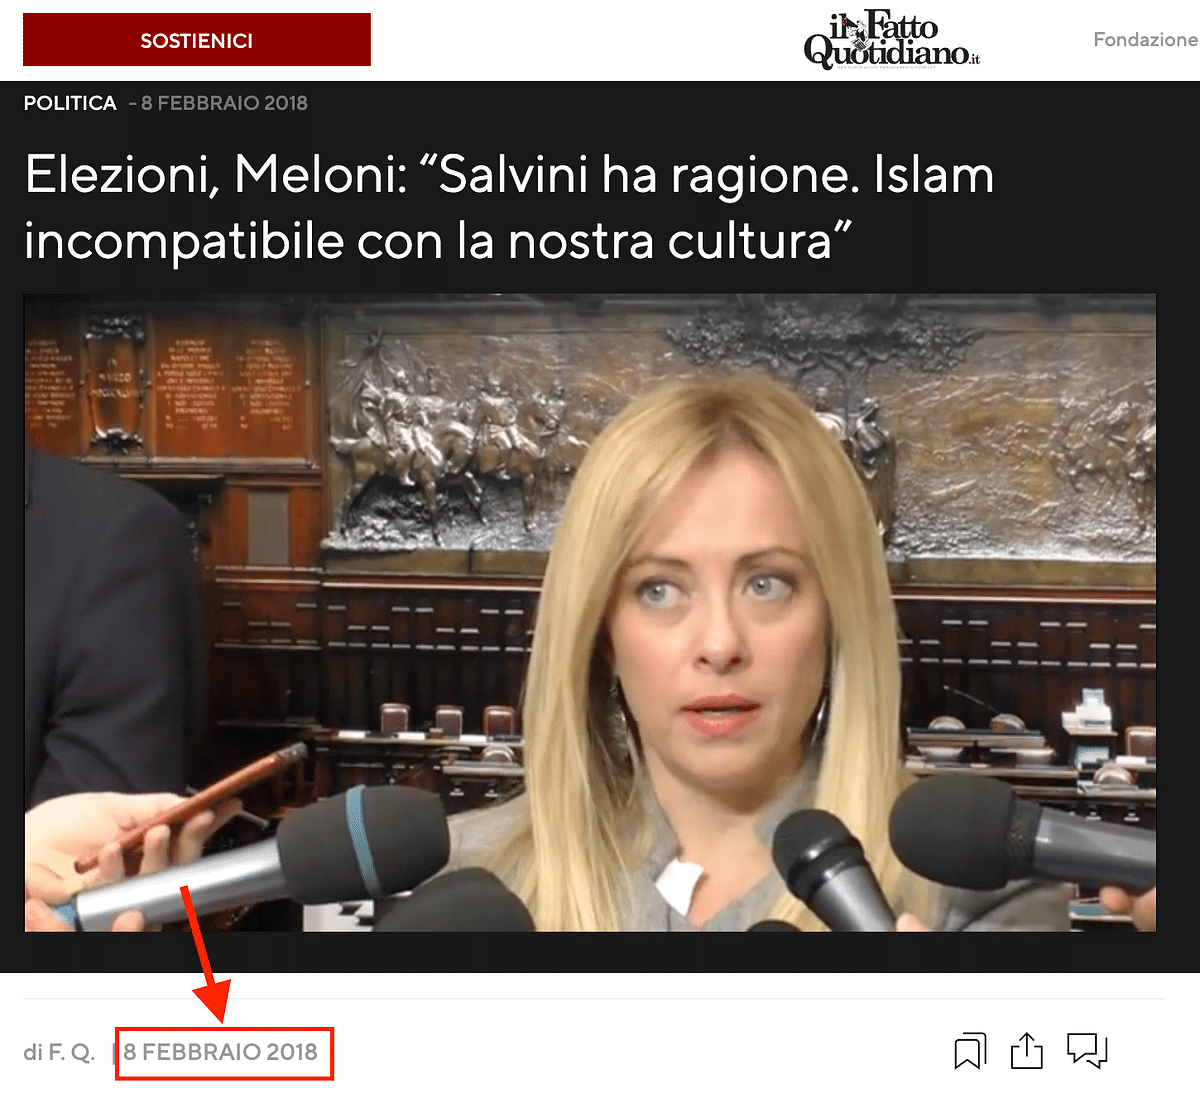 The video dates back to February 2018 and was shot before Giorgia Meloni became the Italian prime minister.